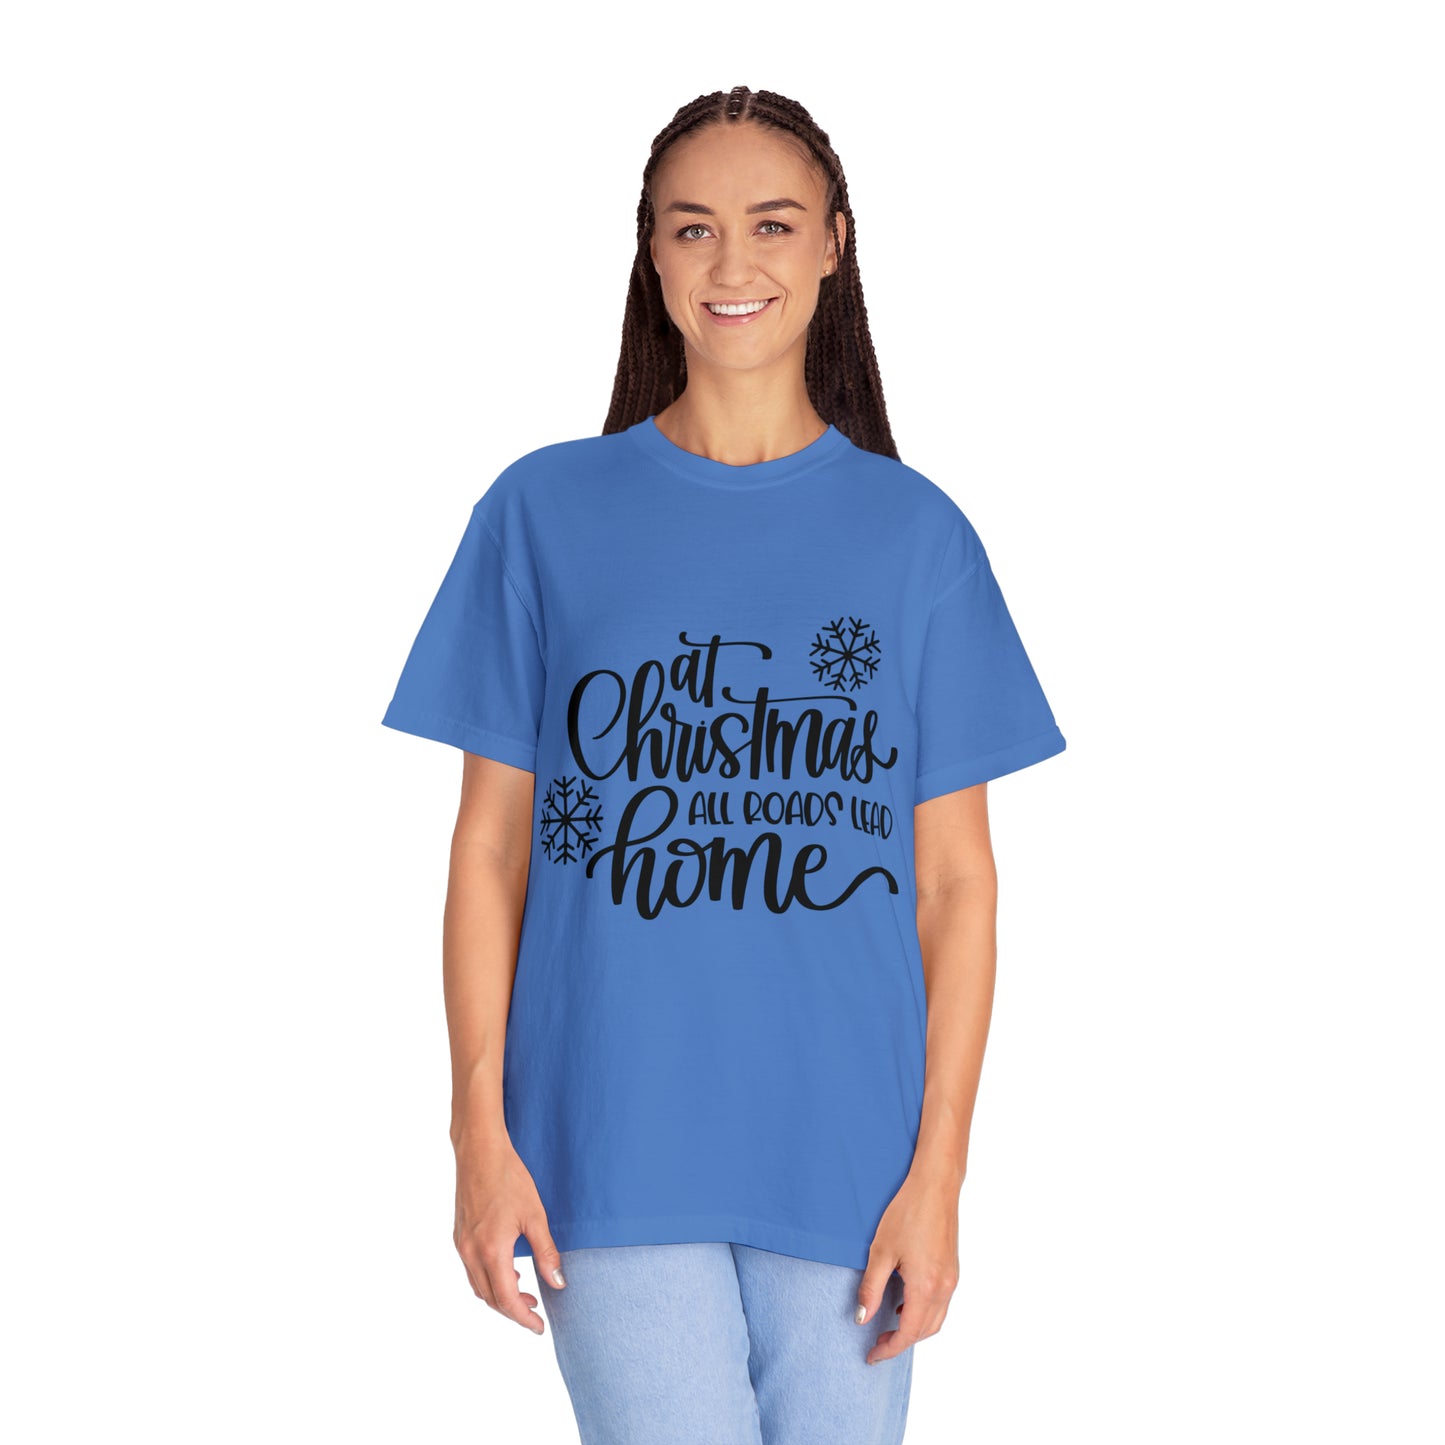 At Christmas All Roads Lead Home Unisex Garment-Dyed T-shirt